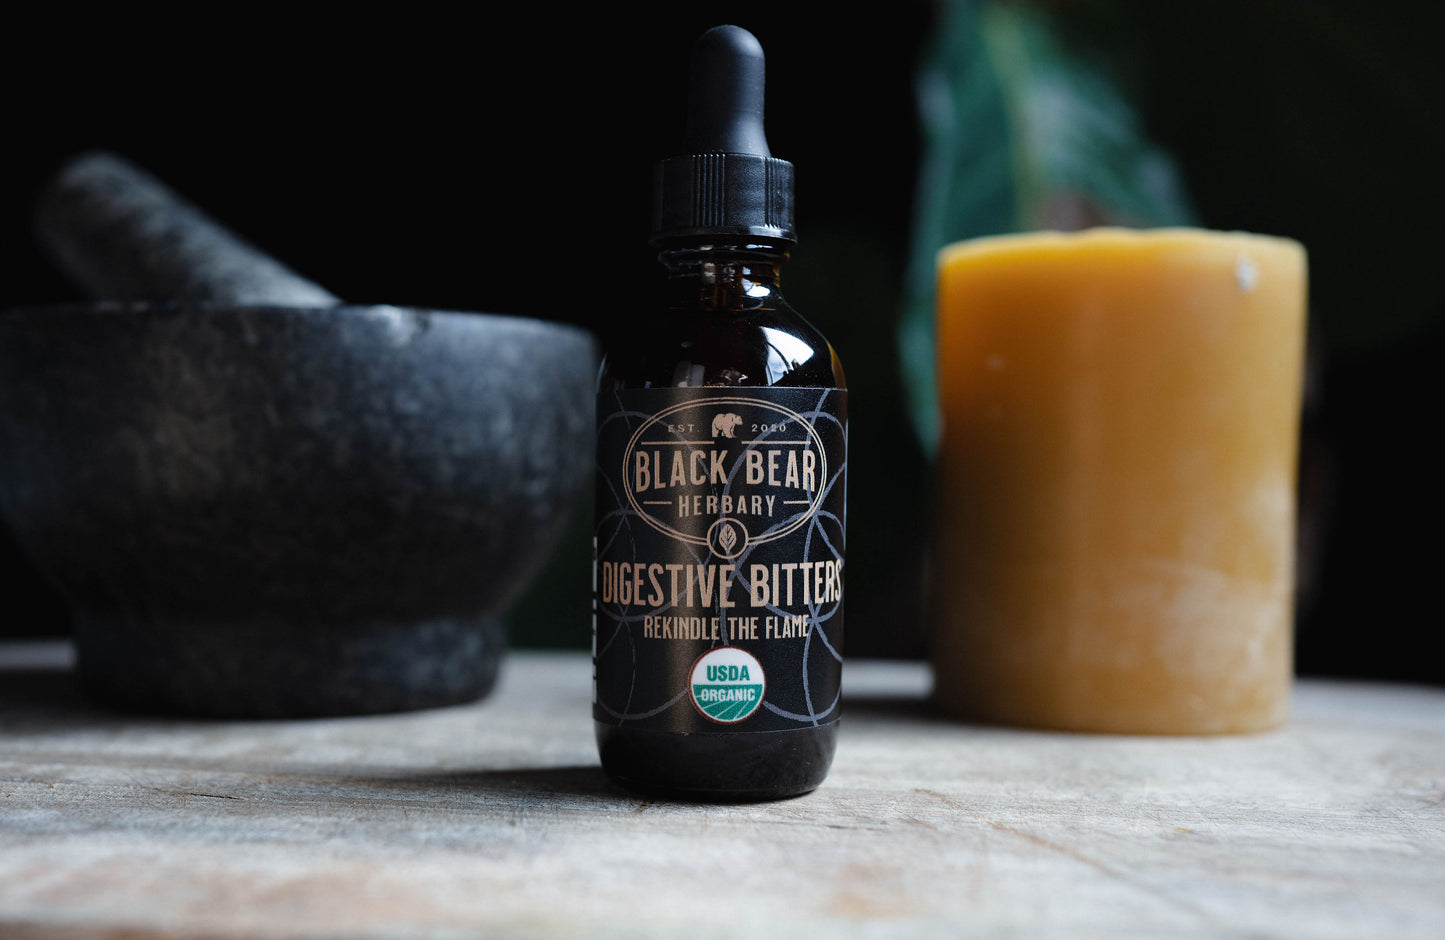 Digestive Bitters Alchemical Extraction